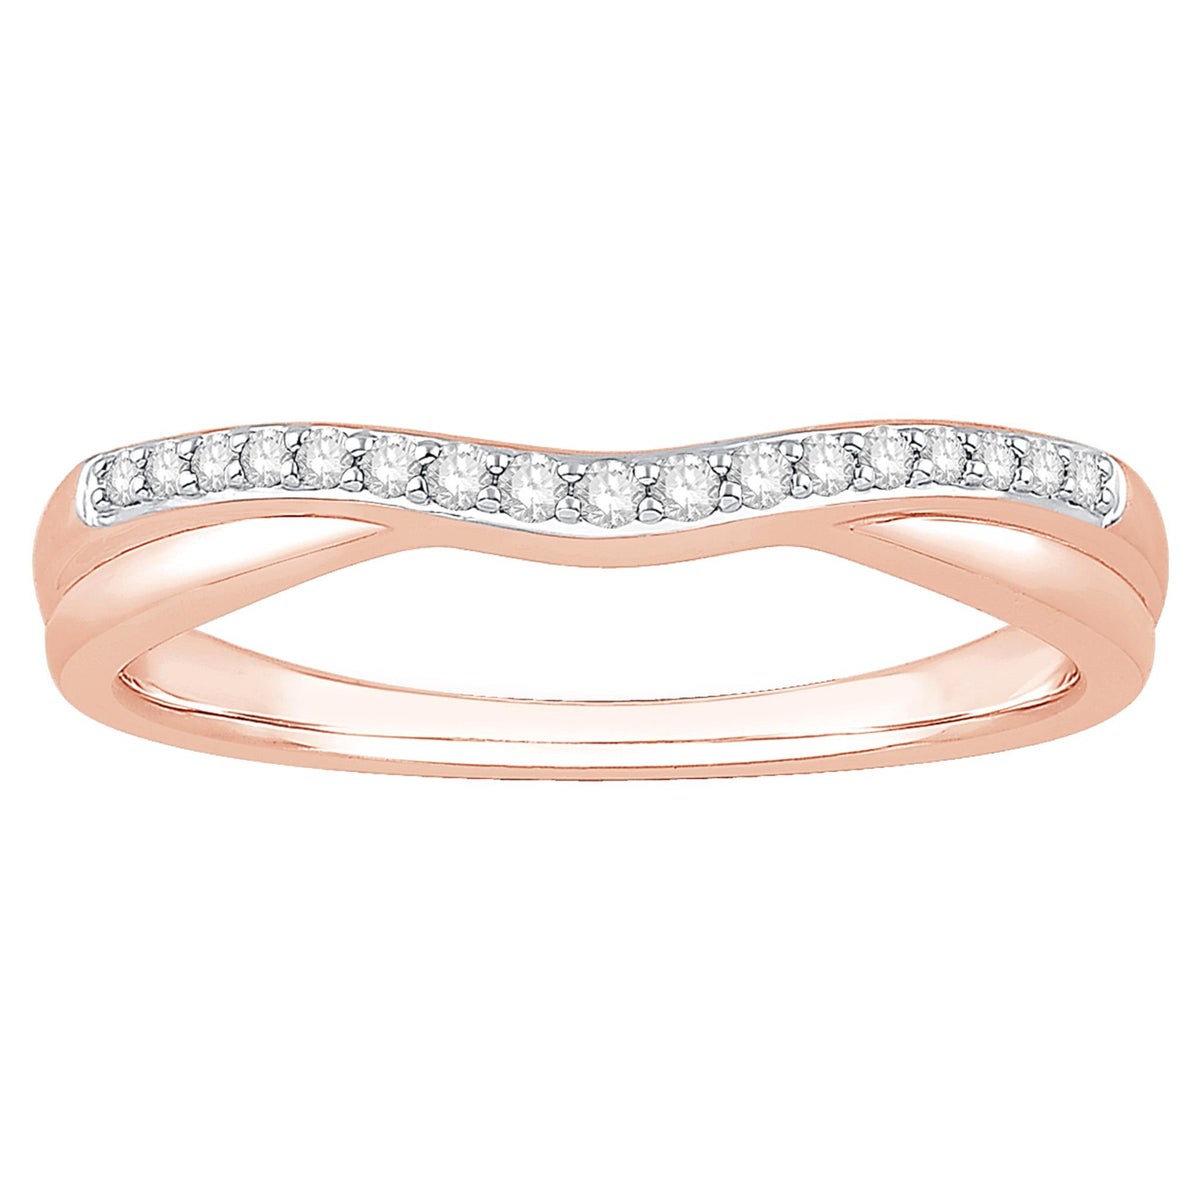 14Kt Rose Gold Curved Wedding Ring With 0.10cttw Natural Diamonds